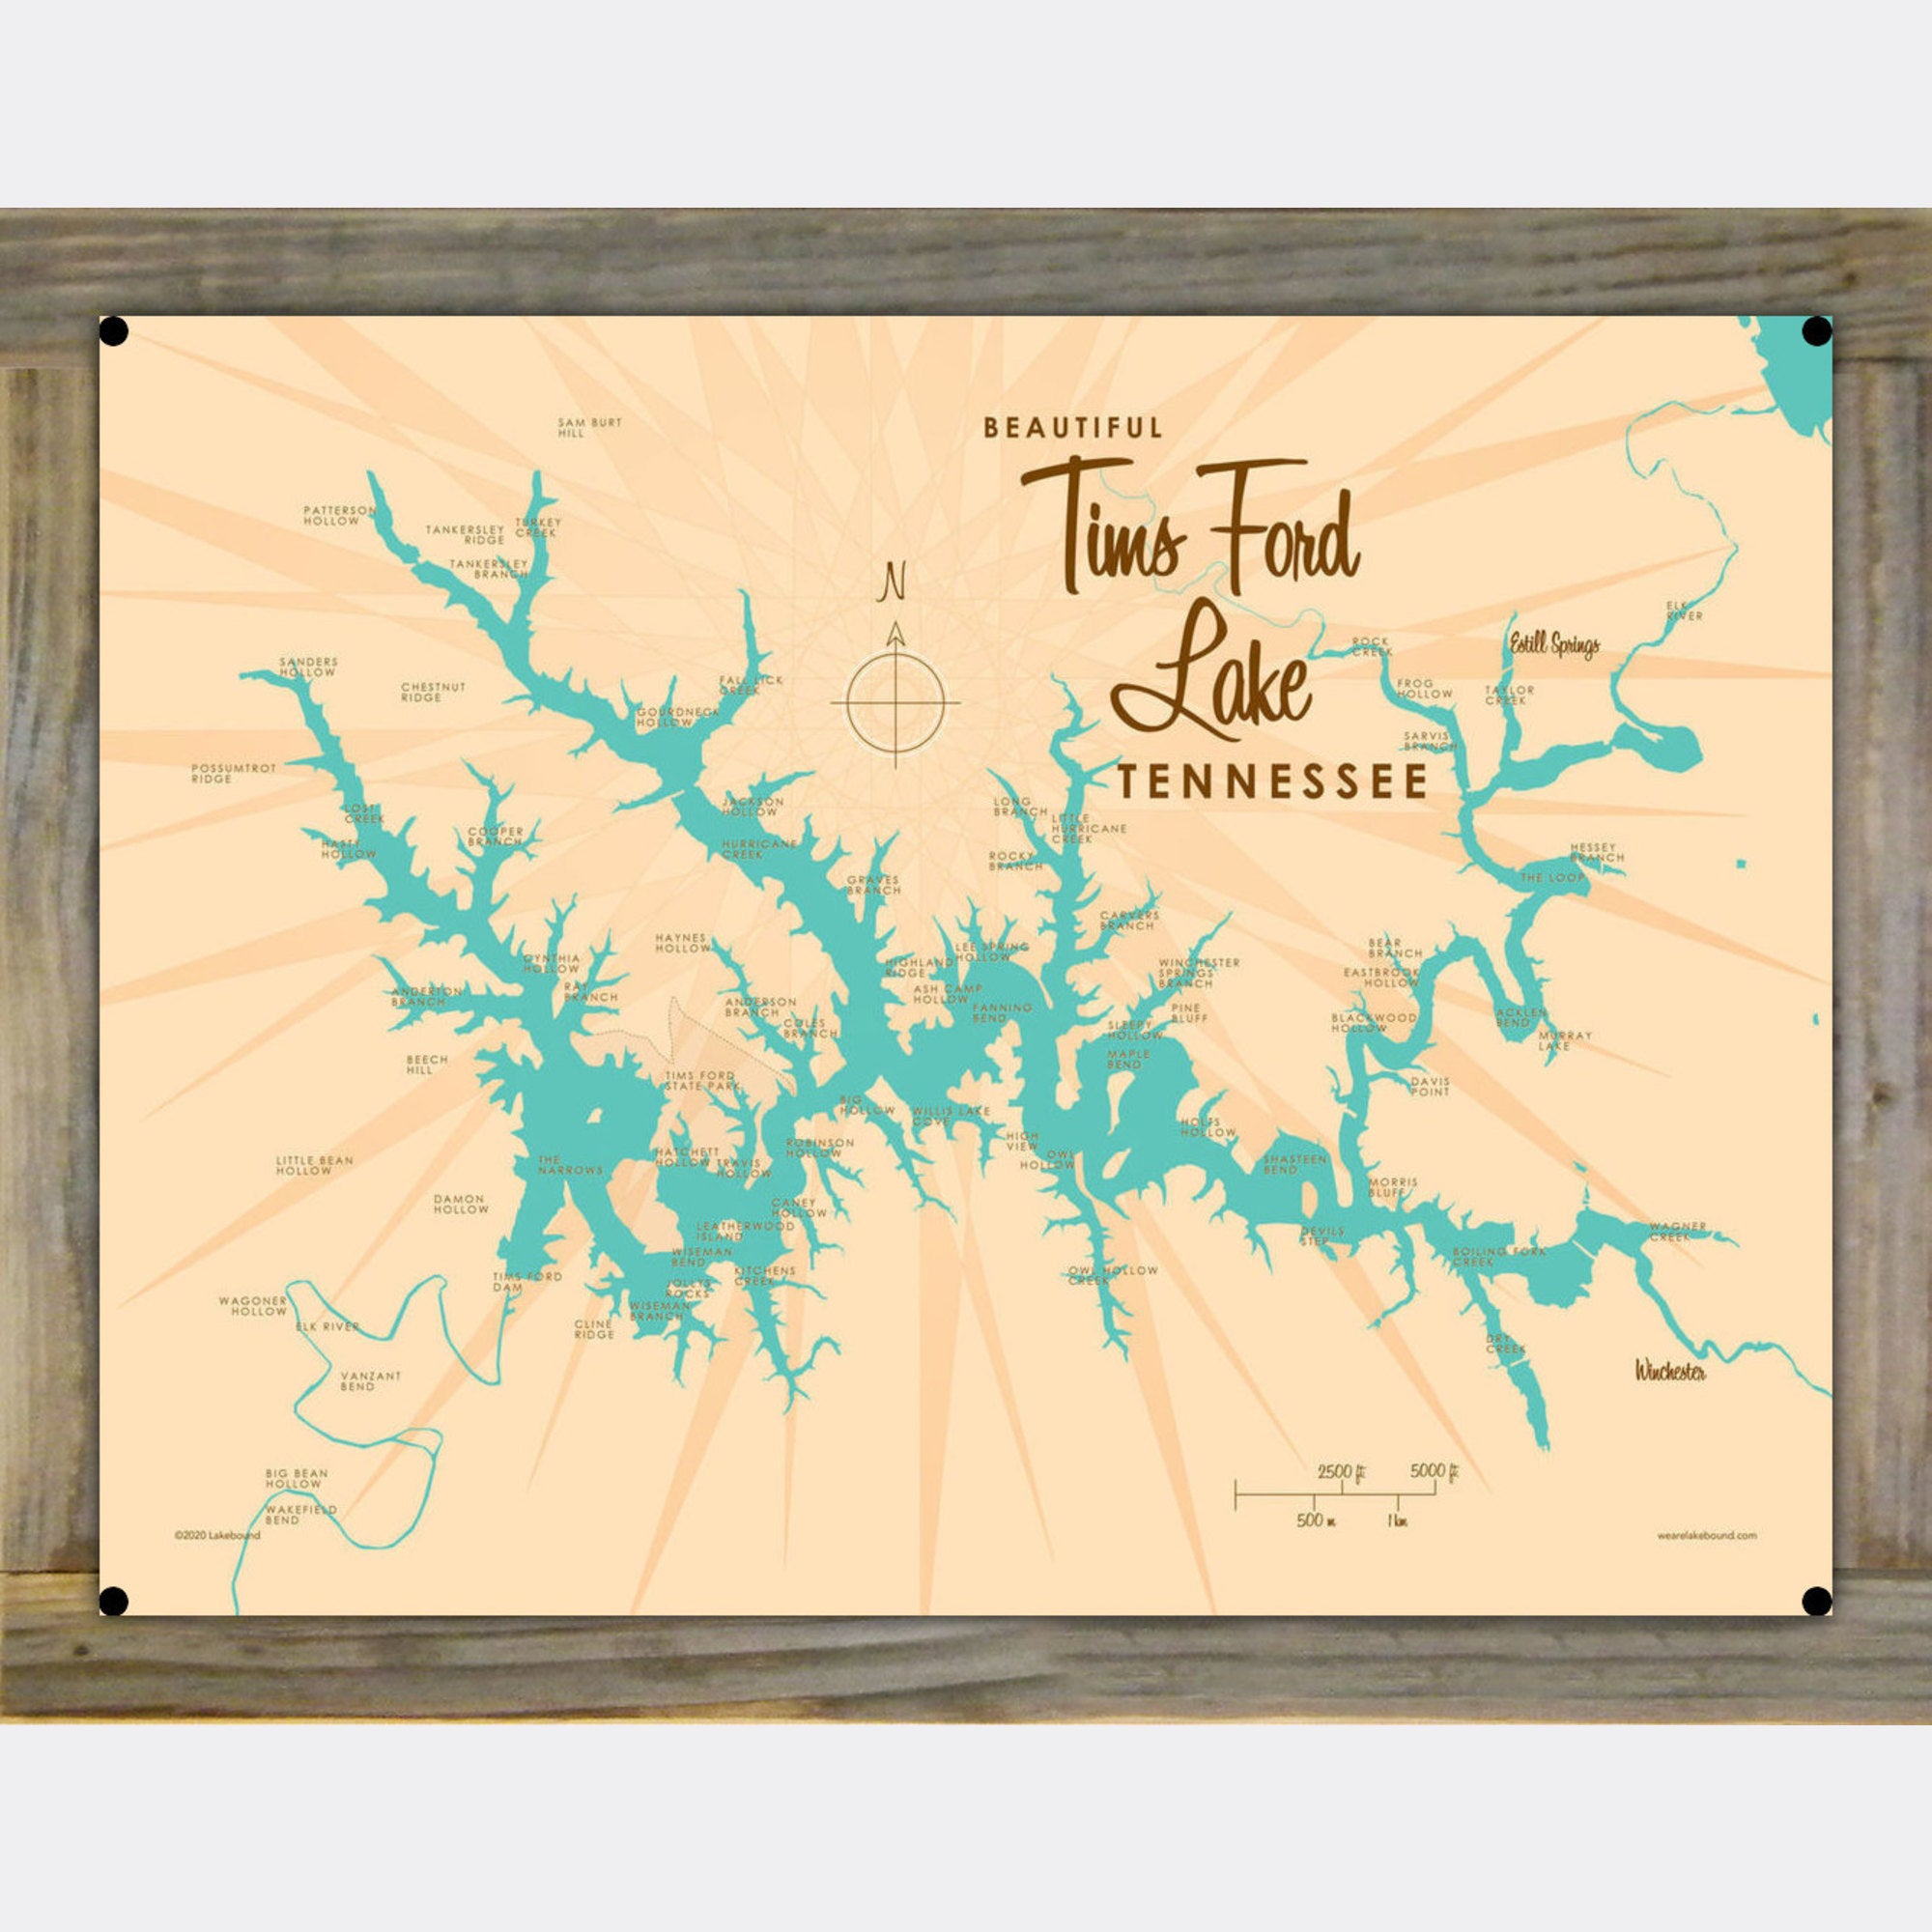 Tims Ford Lake Tennessee, Wood-Mounted Metal Sign Map Art